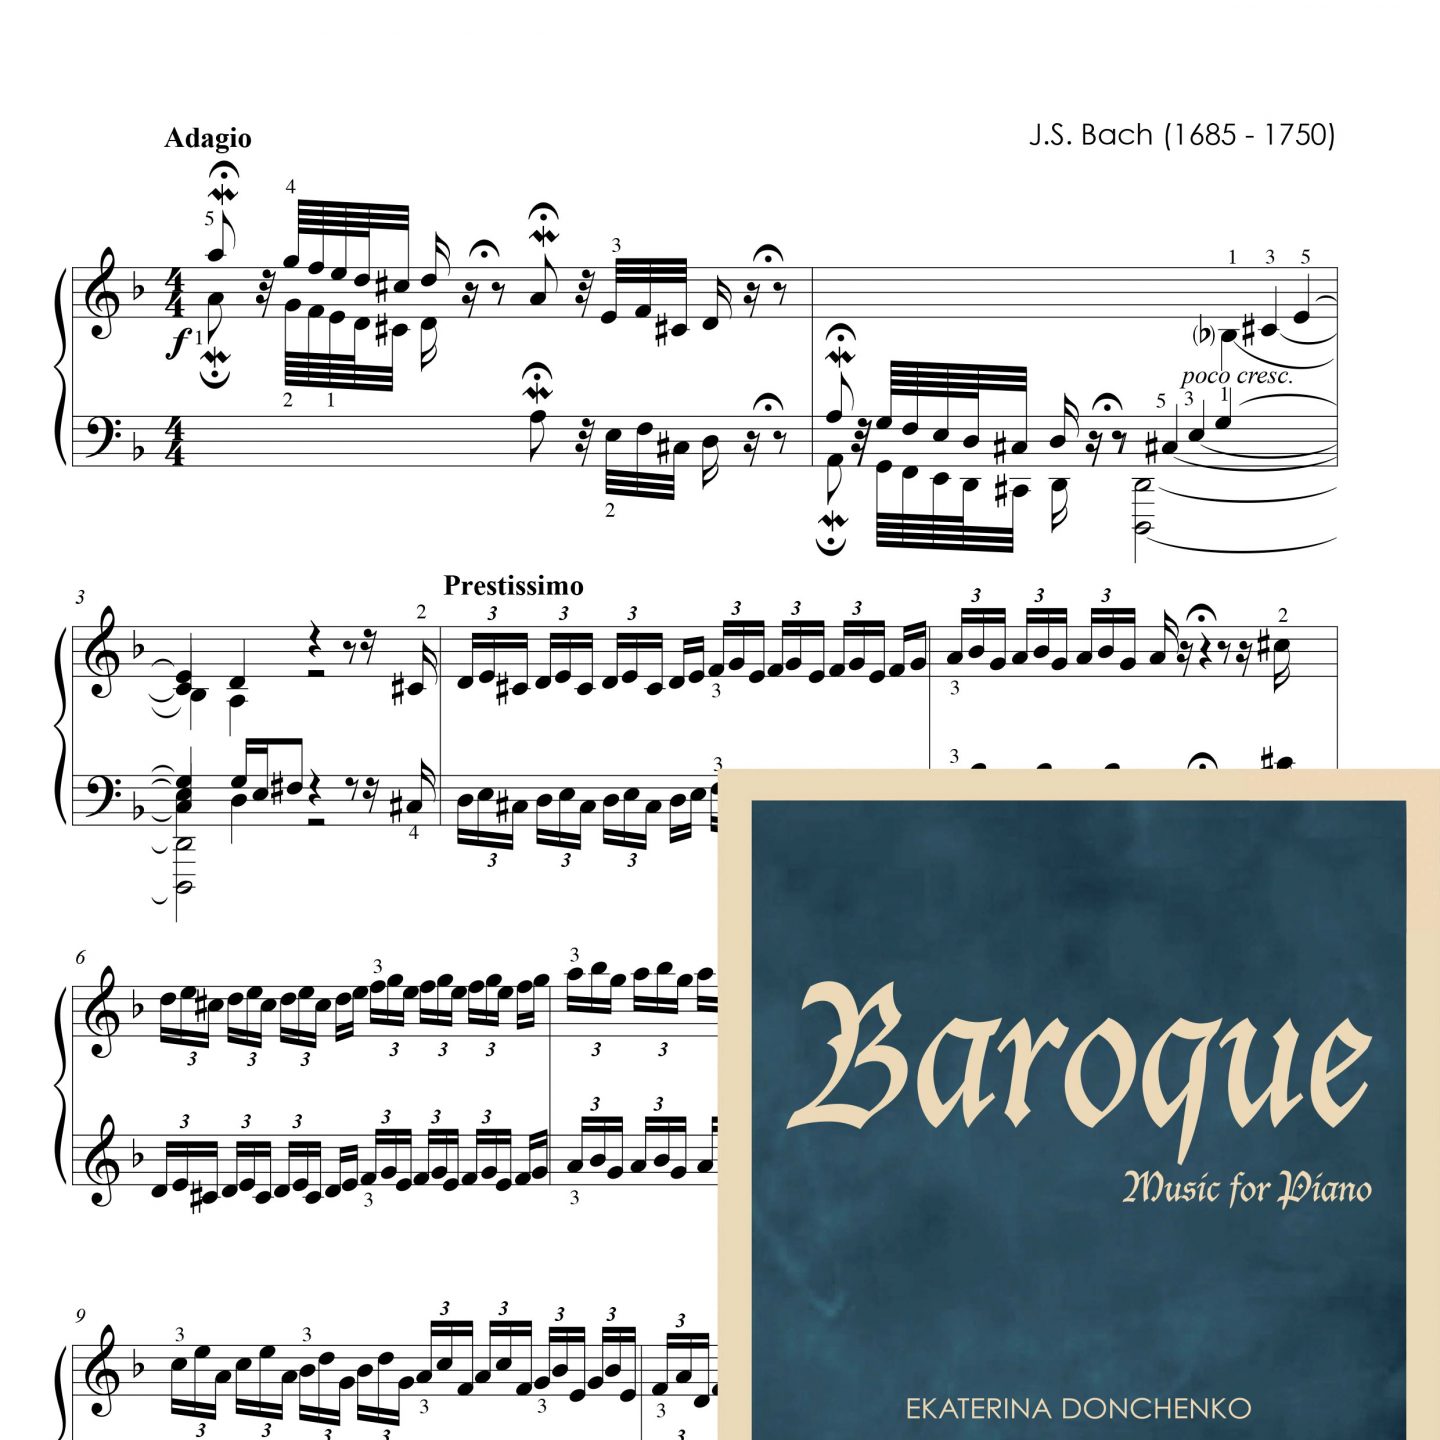 Bach J.S. – TOCCATA AND FUGUE IN D MINOR* (BWV 565), for piano